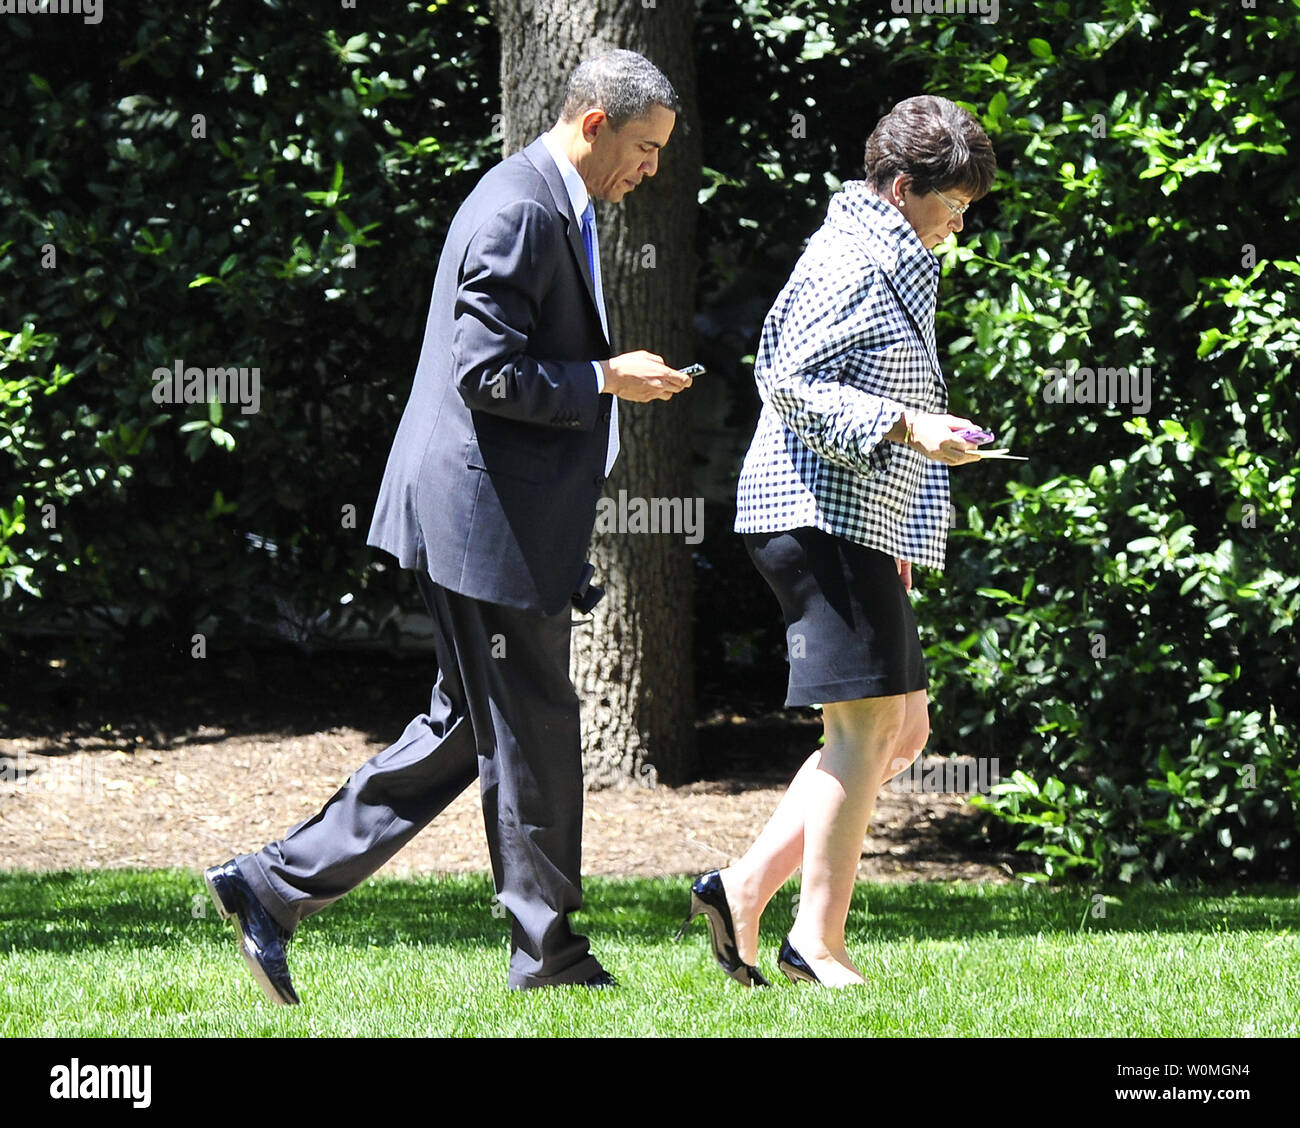 U.S. President Barack Obama looks at his Blackberry as he and Valerie Jarrett walk toward the Oval Office of the White House after Obama spoke to the Business Council at the Park Hyatt Hotel in Washington on May 4, 2010. In his remarks the President also spoke about the attempted bombing in Times Square.  UPI/Ron SachsPool Stock Photo